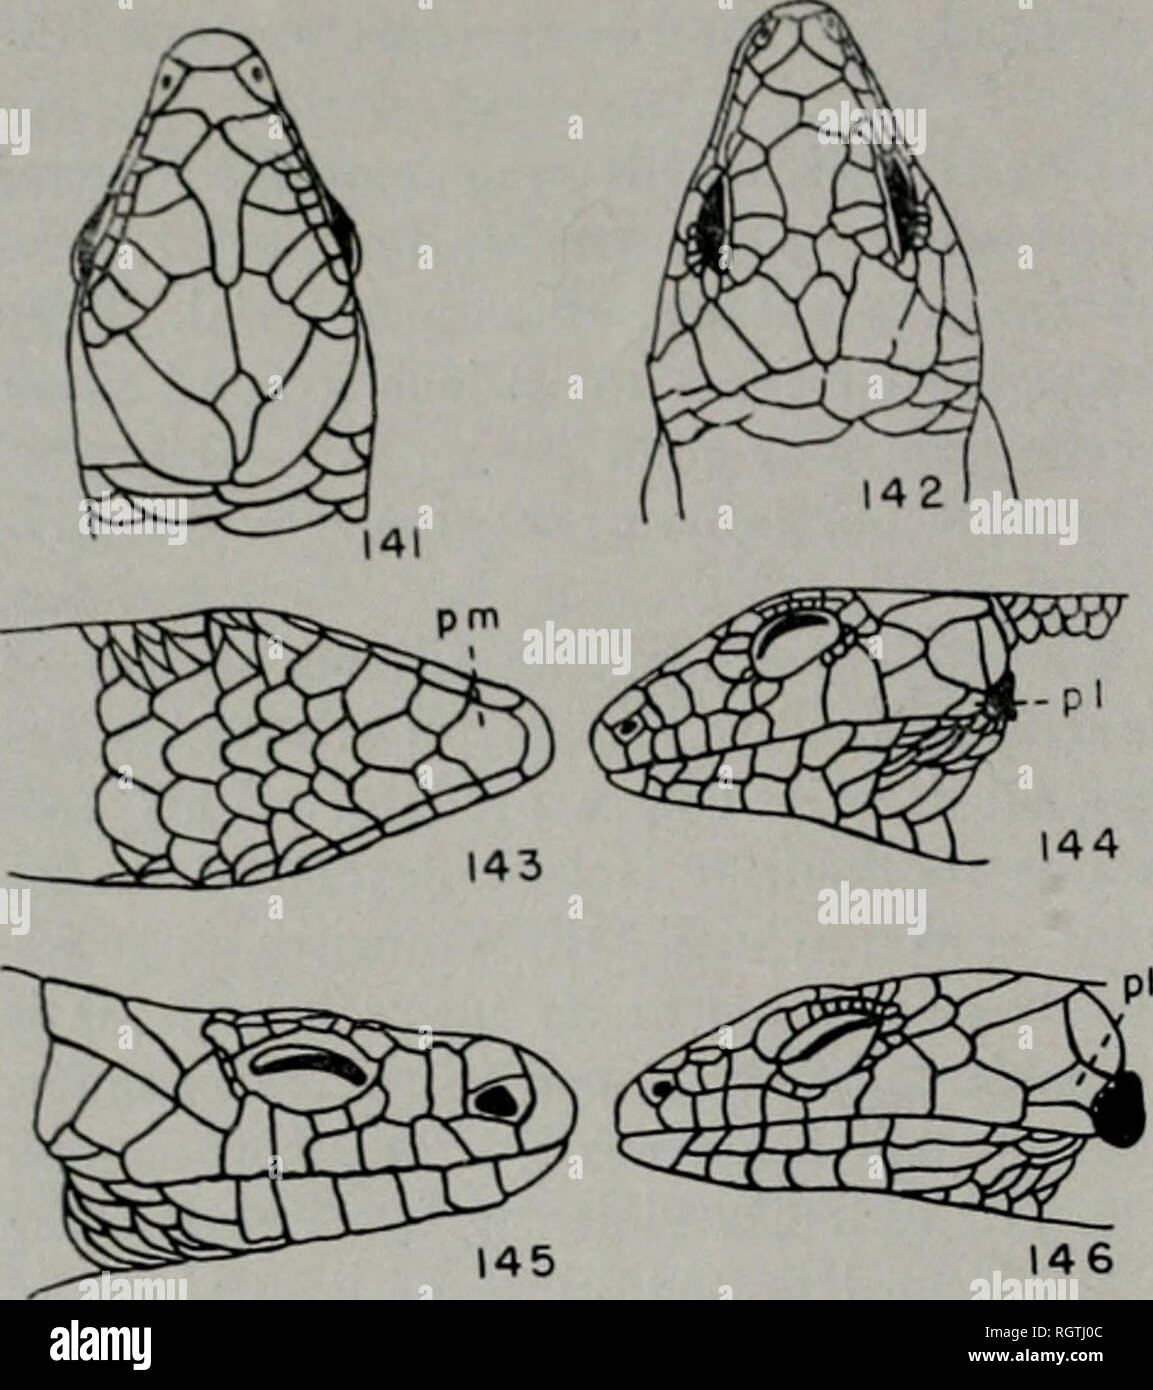 . Bulletin. Natural history; Natural history. 160 Illinois Natural History Survey Bulletin Vol. 28, Art. 1. Figs. 141-146.—Characteristics of lizards: 141, head of Scincella laterale; 142, head of Eumeces; 143, chin of Eumeces ant/iracinus, showing single postmental (pm) scale; 144, head of Eumeces laticeps, showing single post- labial (pi) scale; 145, head of Eumeces sep- tentrionalis; 146, head of Eumeces fasciatus, showing two subequal postlabial scales. rows 1 and 2 of venter usually with thin, longitudinal dark stripes Ophisaurus aitenuatus attenuatus White markings on posterior corner of Stock Photo